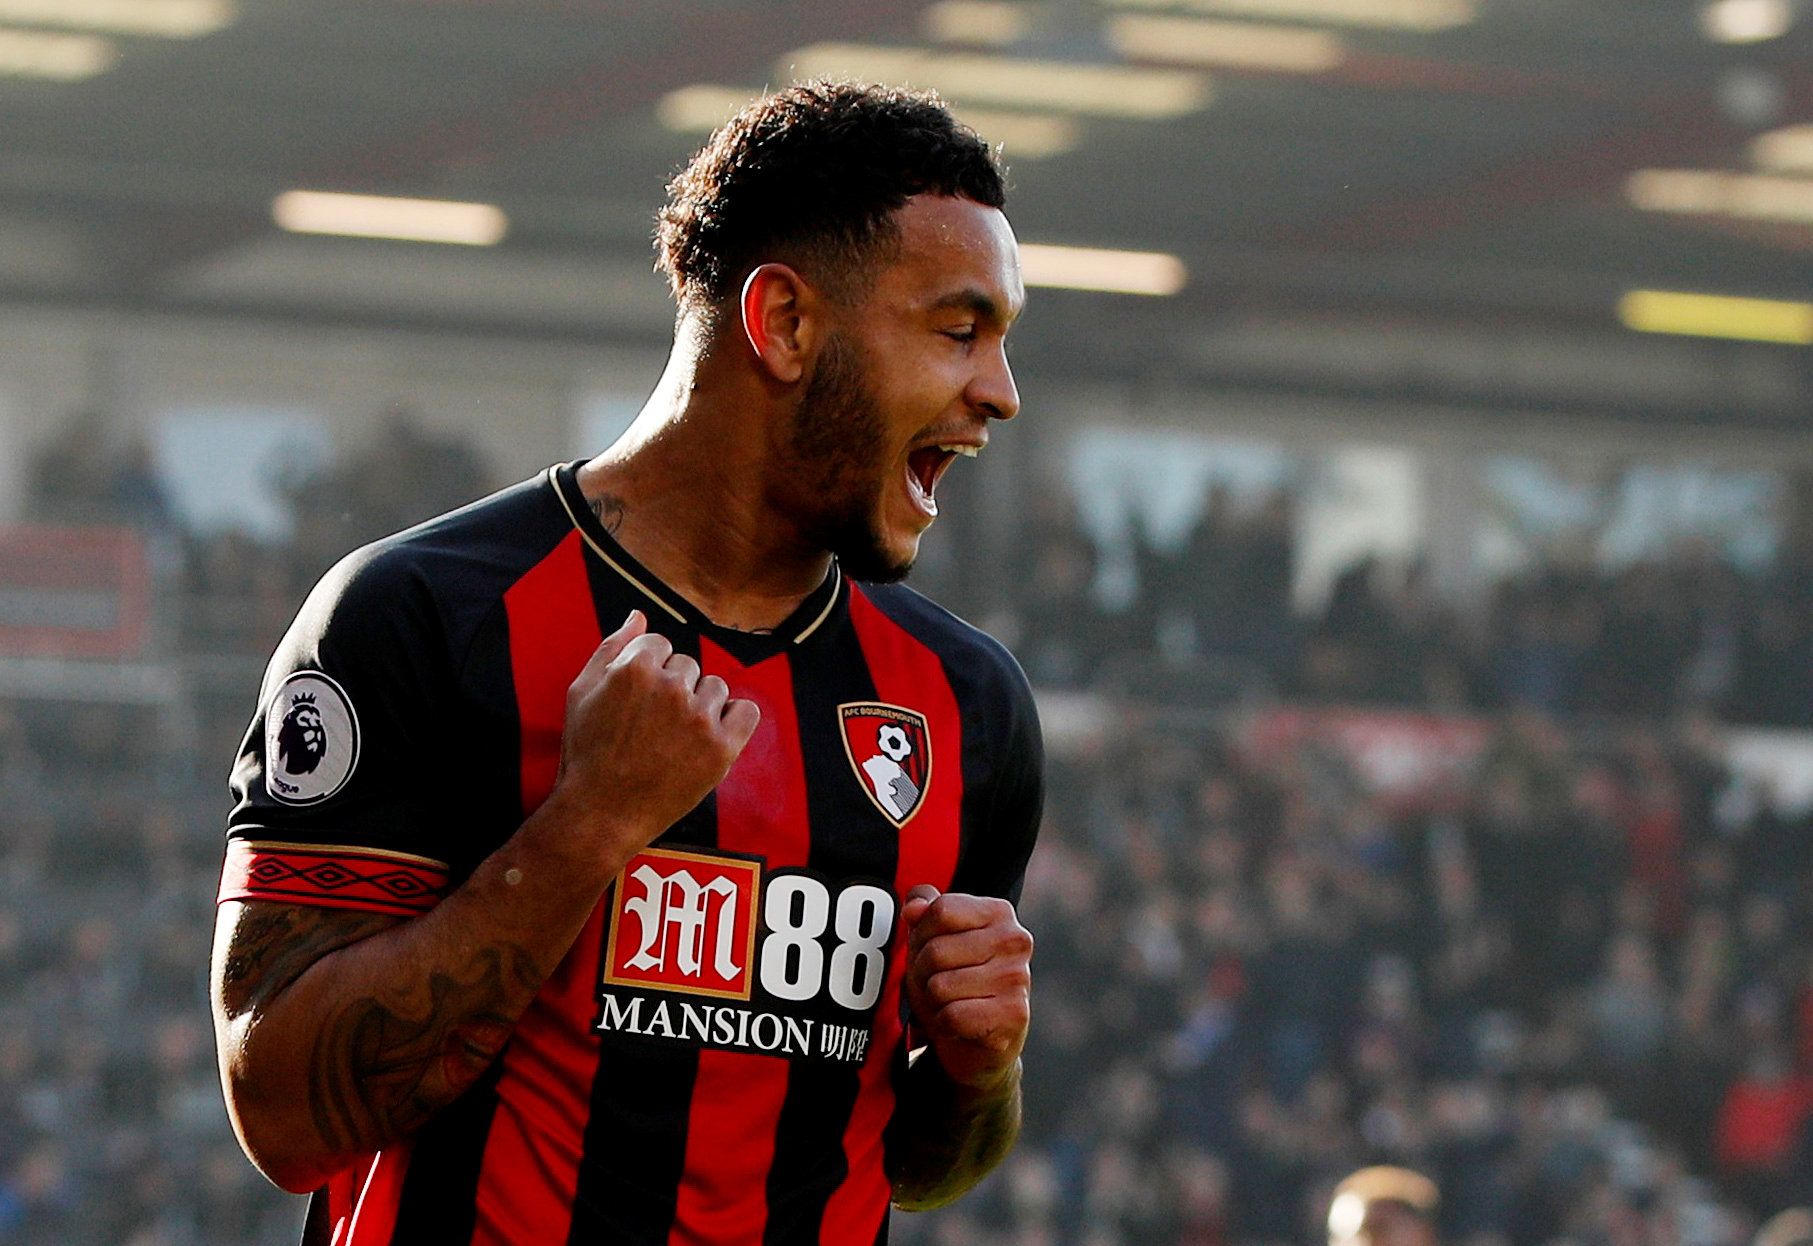 Soccer Football - Premier League - AFC Bournemouth v Wolverhampton Wanderers - Vitality Stadium, Bournemouth, Britain - February 23, 2019  Bournemouth's Joshua King celebrates scoring their first goal   Action Images via Reuters/John Sibley  EDITORIAL USE ONLY. No use with unauthorized audio, video, data, fixture lists, club/league logos or 